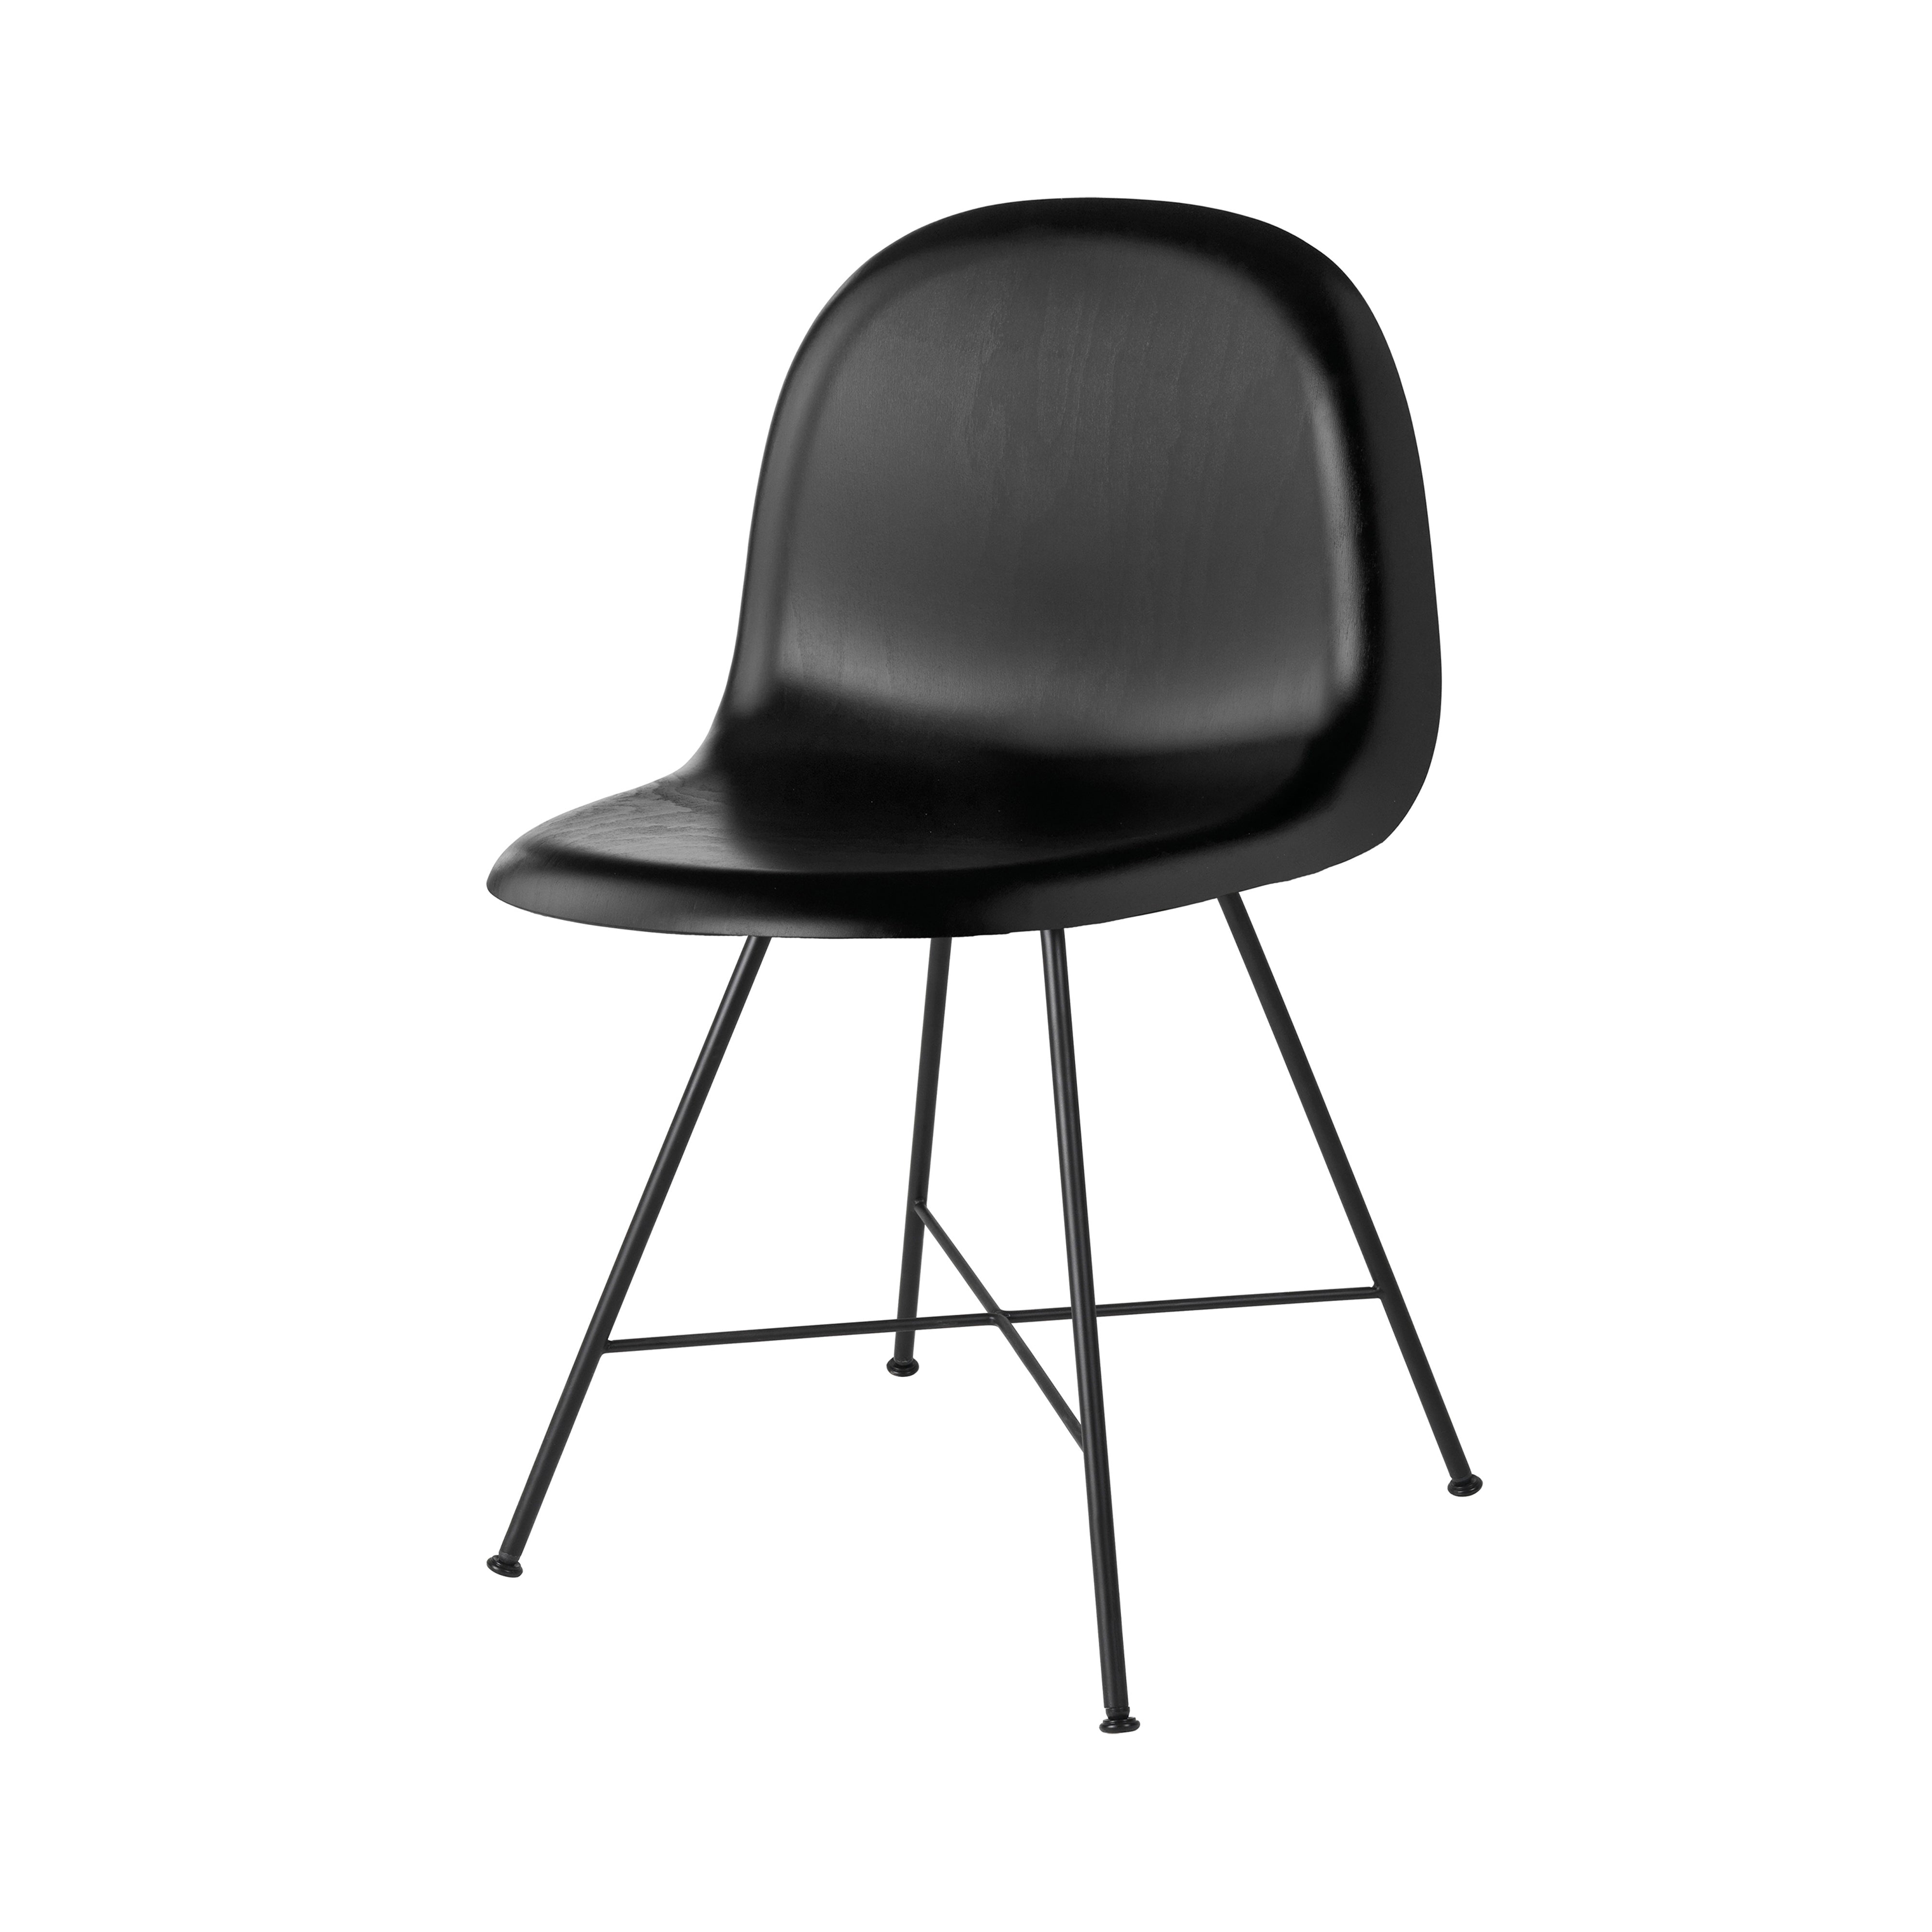 3D Dining Chair: Center Base + Black Stained Beech